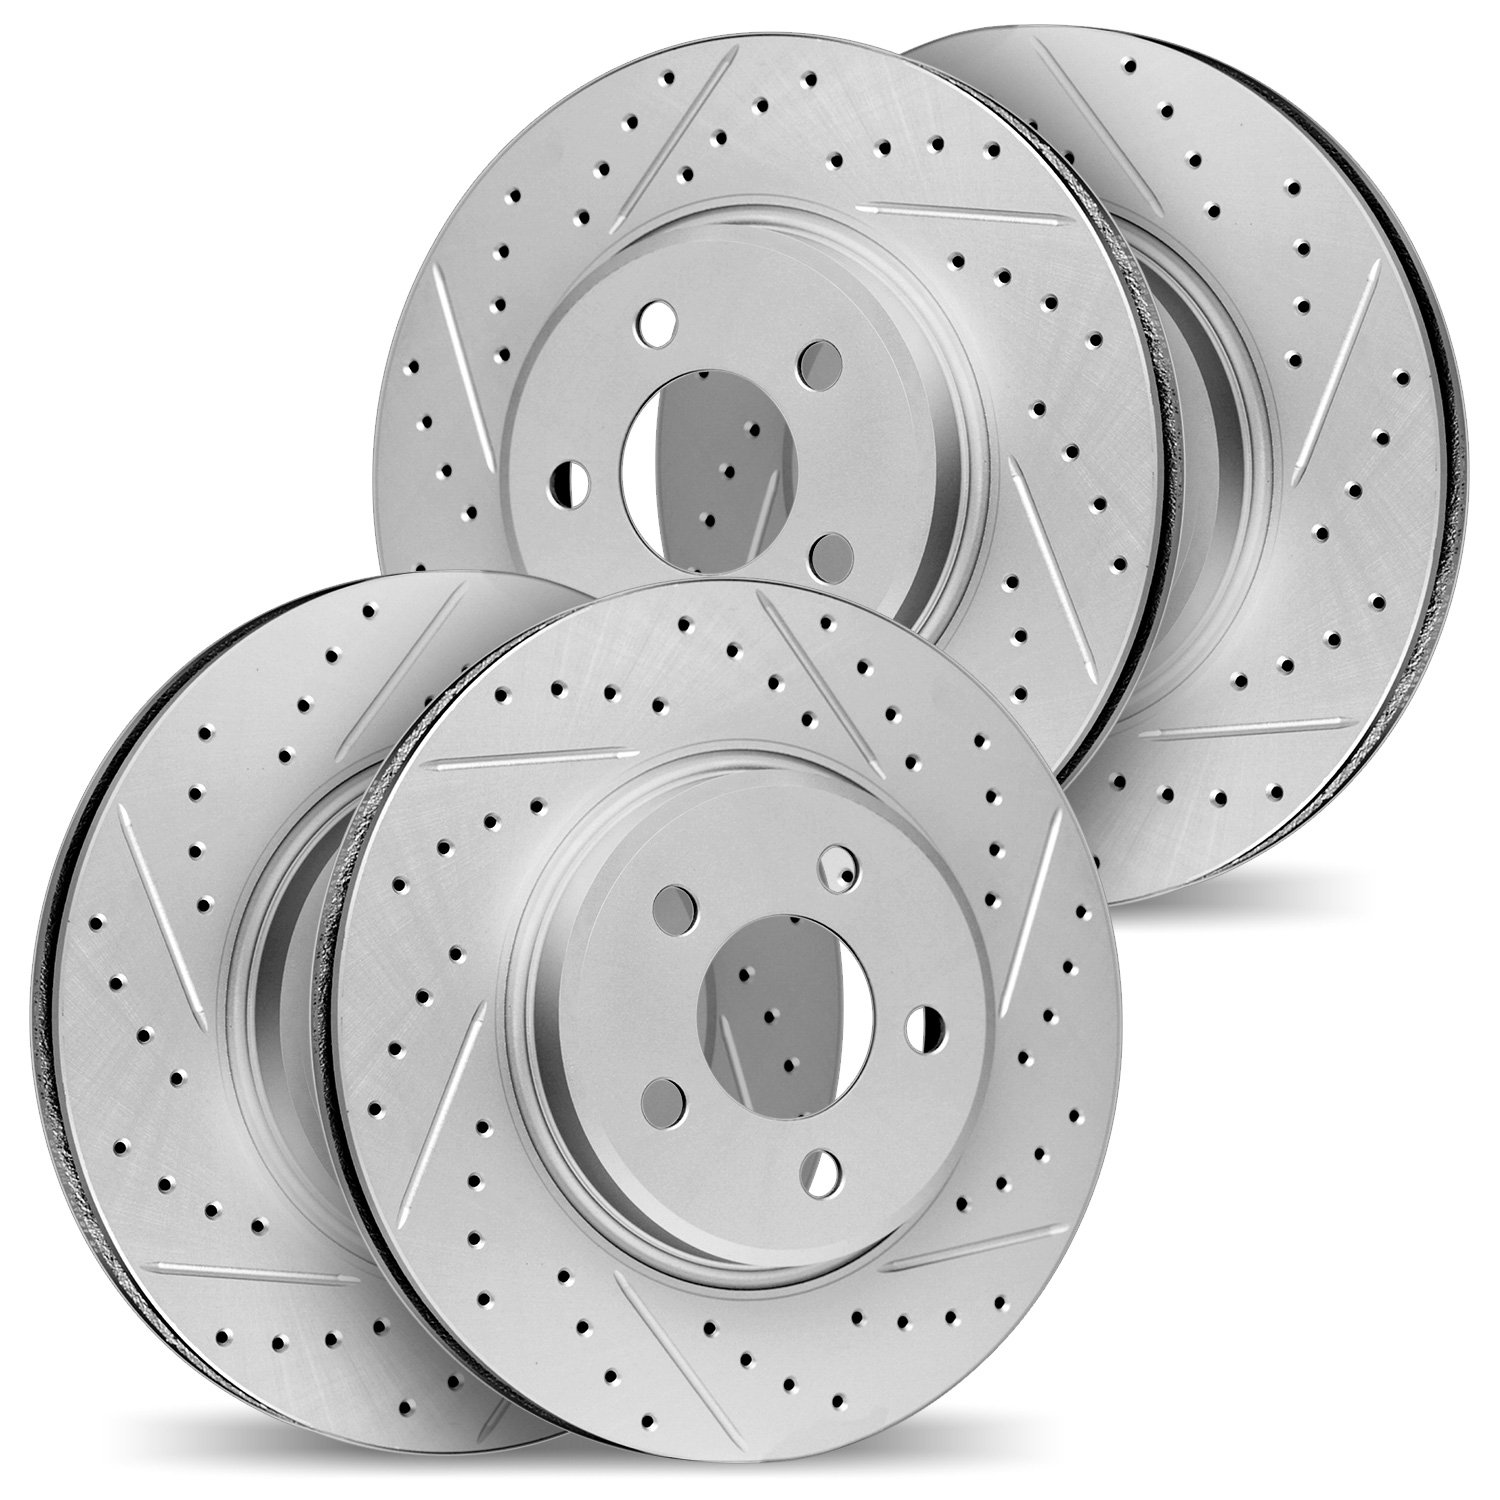 2004-31013 Geoperformance Drilled/Slotted Brake Rotors, 1999-2006 BMW, Position: Front and Rear